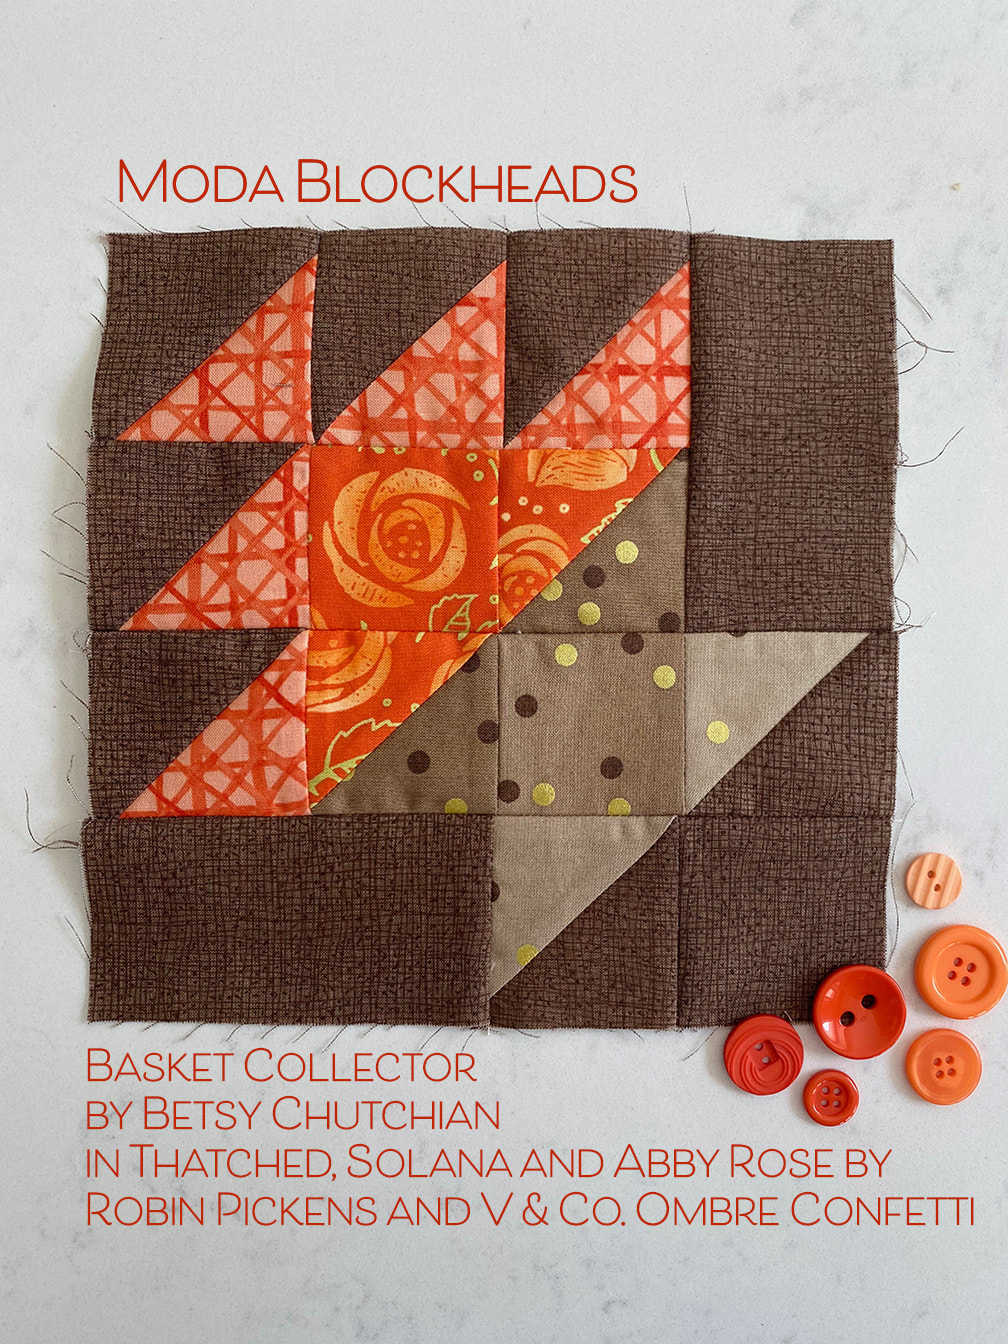 Basket Collector quilt block for Moda Blockheads in Robin Pickens Solana and Abby Rose